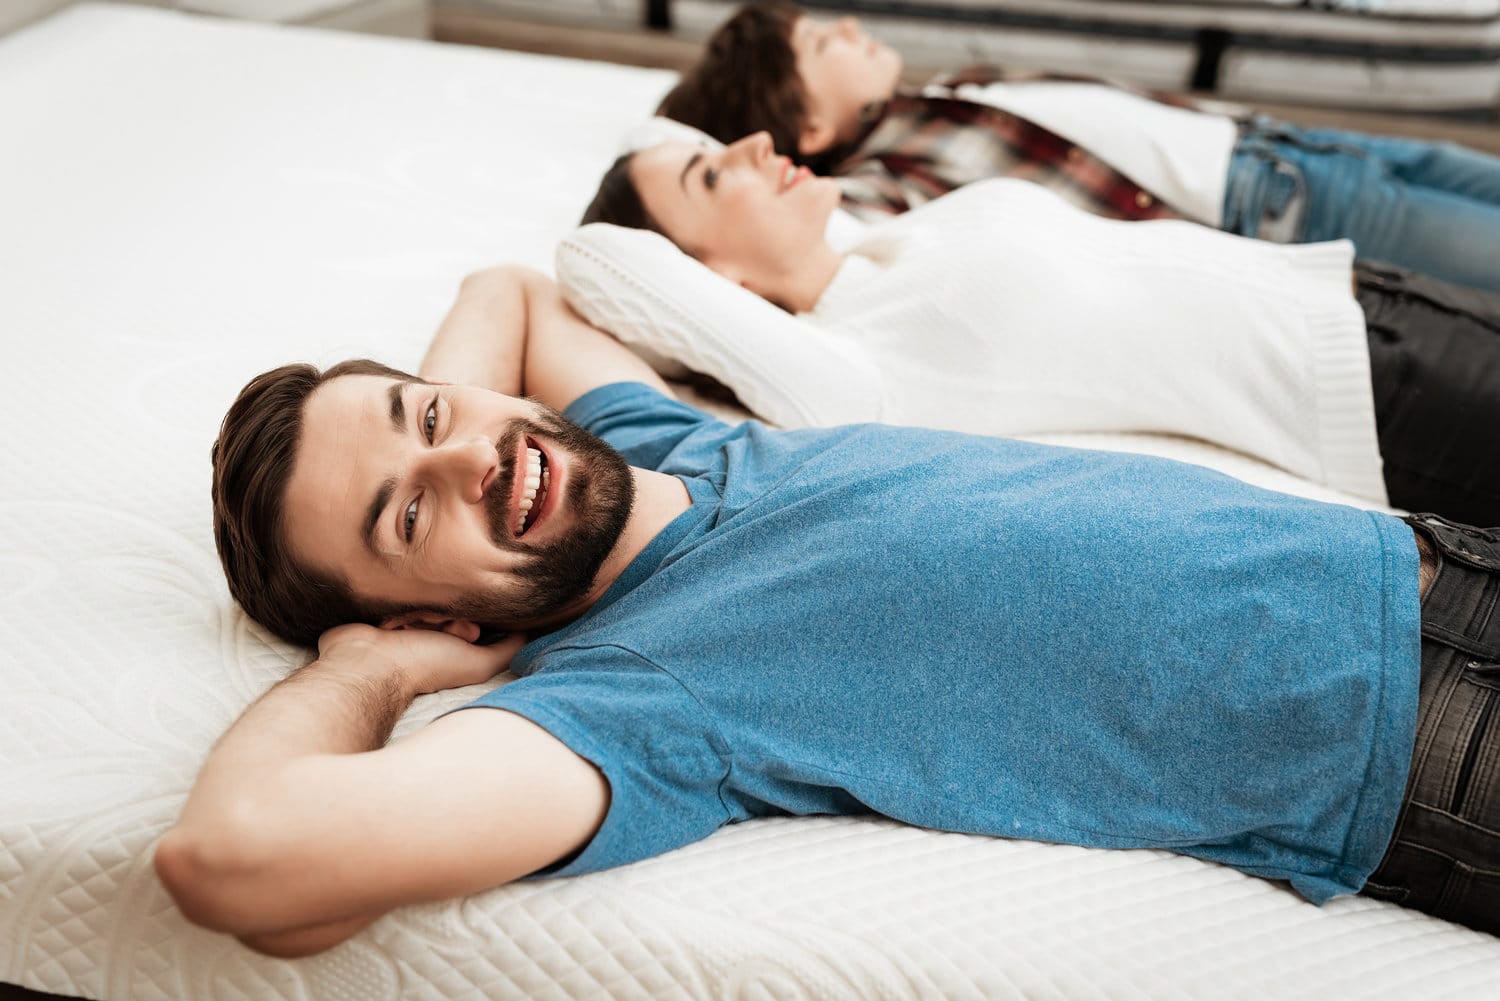 Memory Foam or Innerspring? How to Choose the Right Mattress.